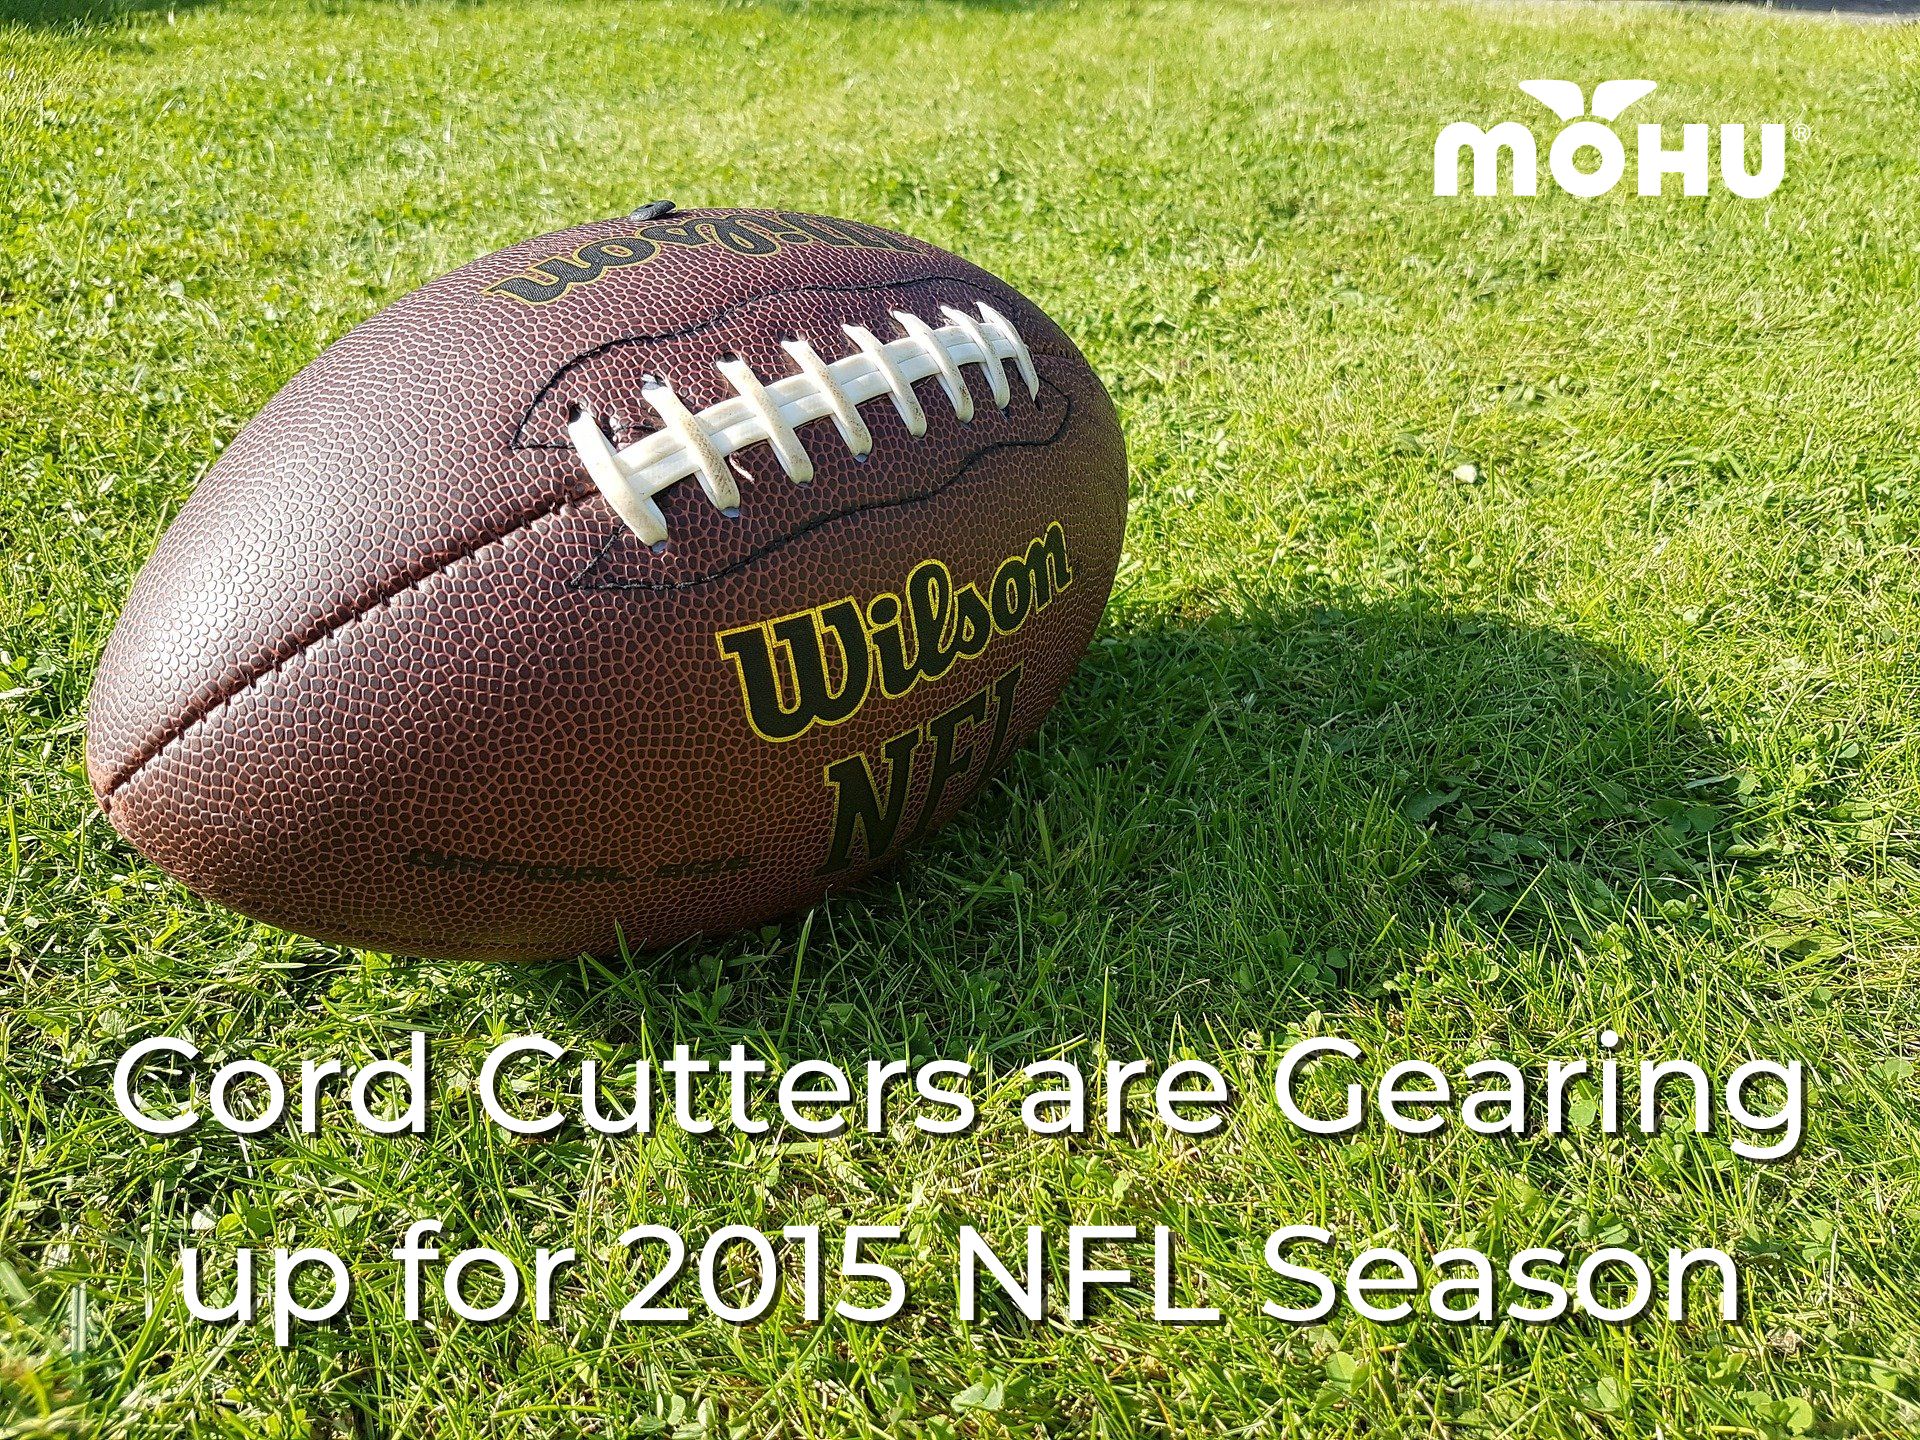 Football sitting in the grass, Mohu logo, Cord Cutters are Gearing up for 2015 NFL Season